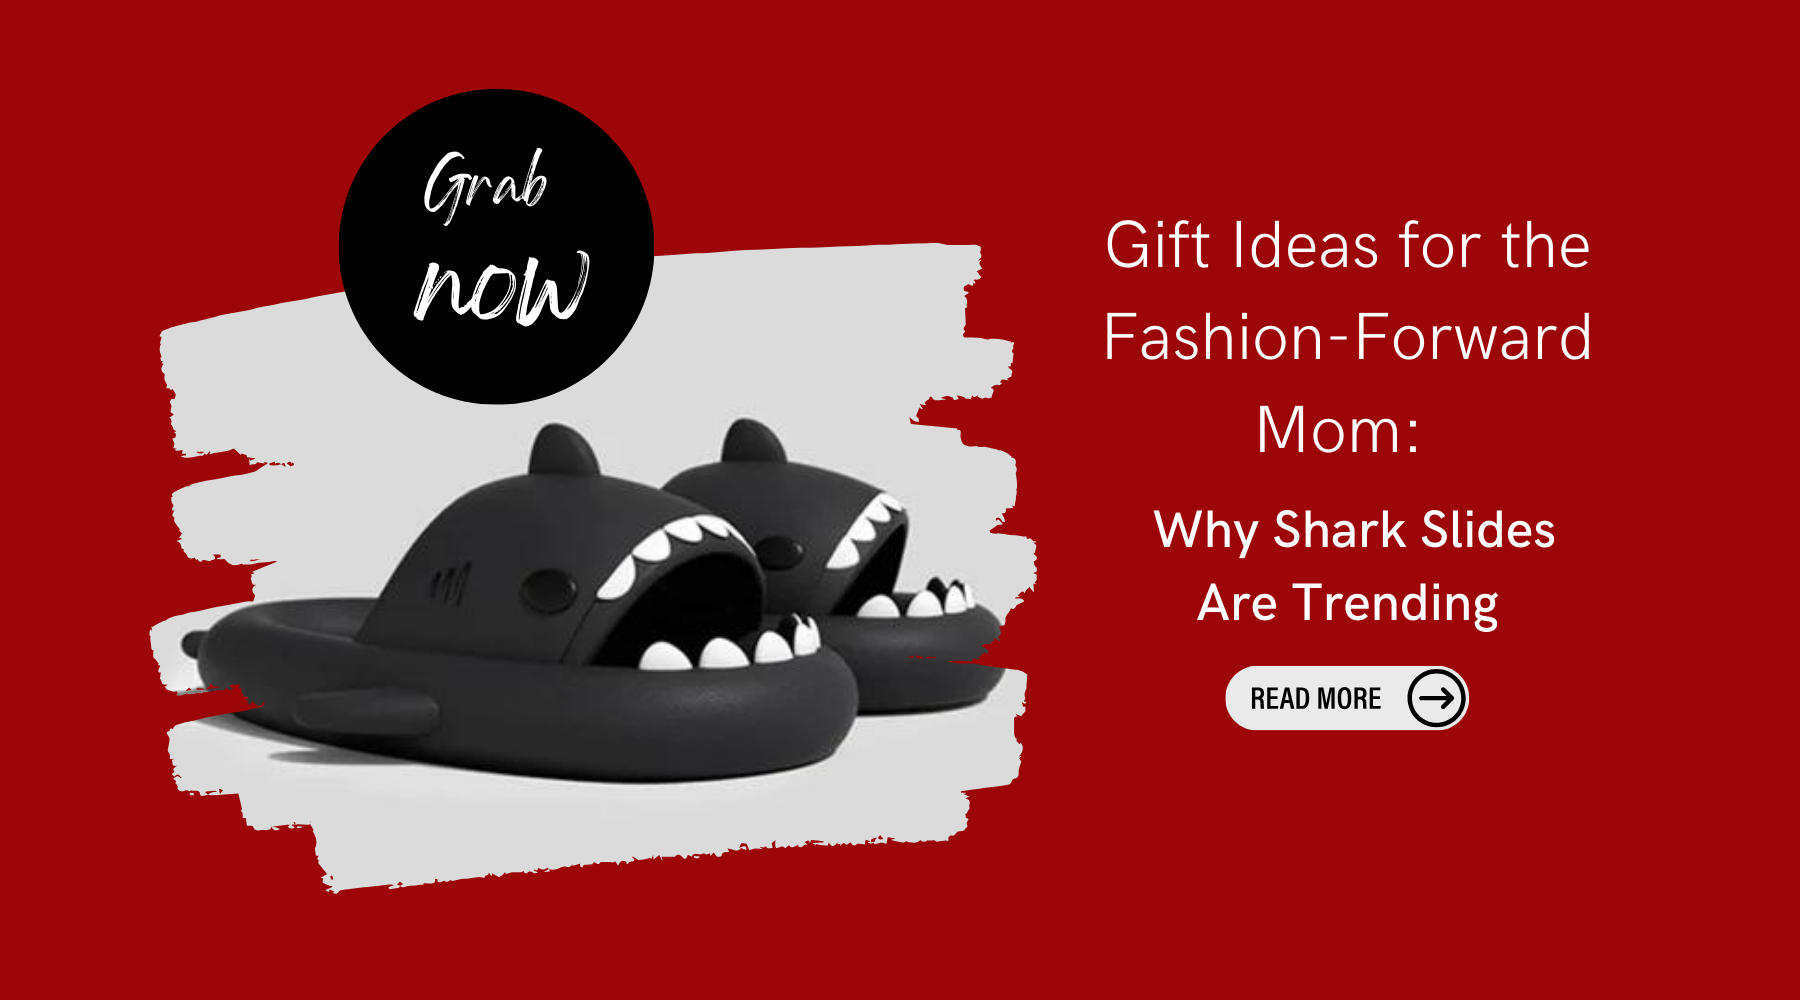 Gift Ideas for the Fashion-Forward Mom: Why Shark Slides Are Trending